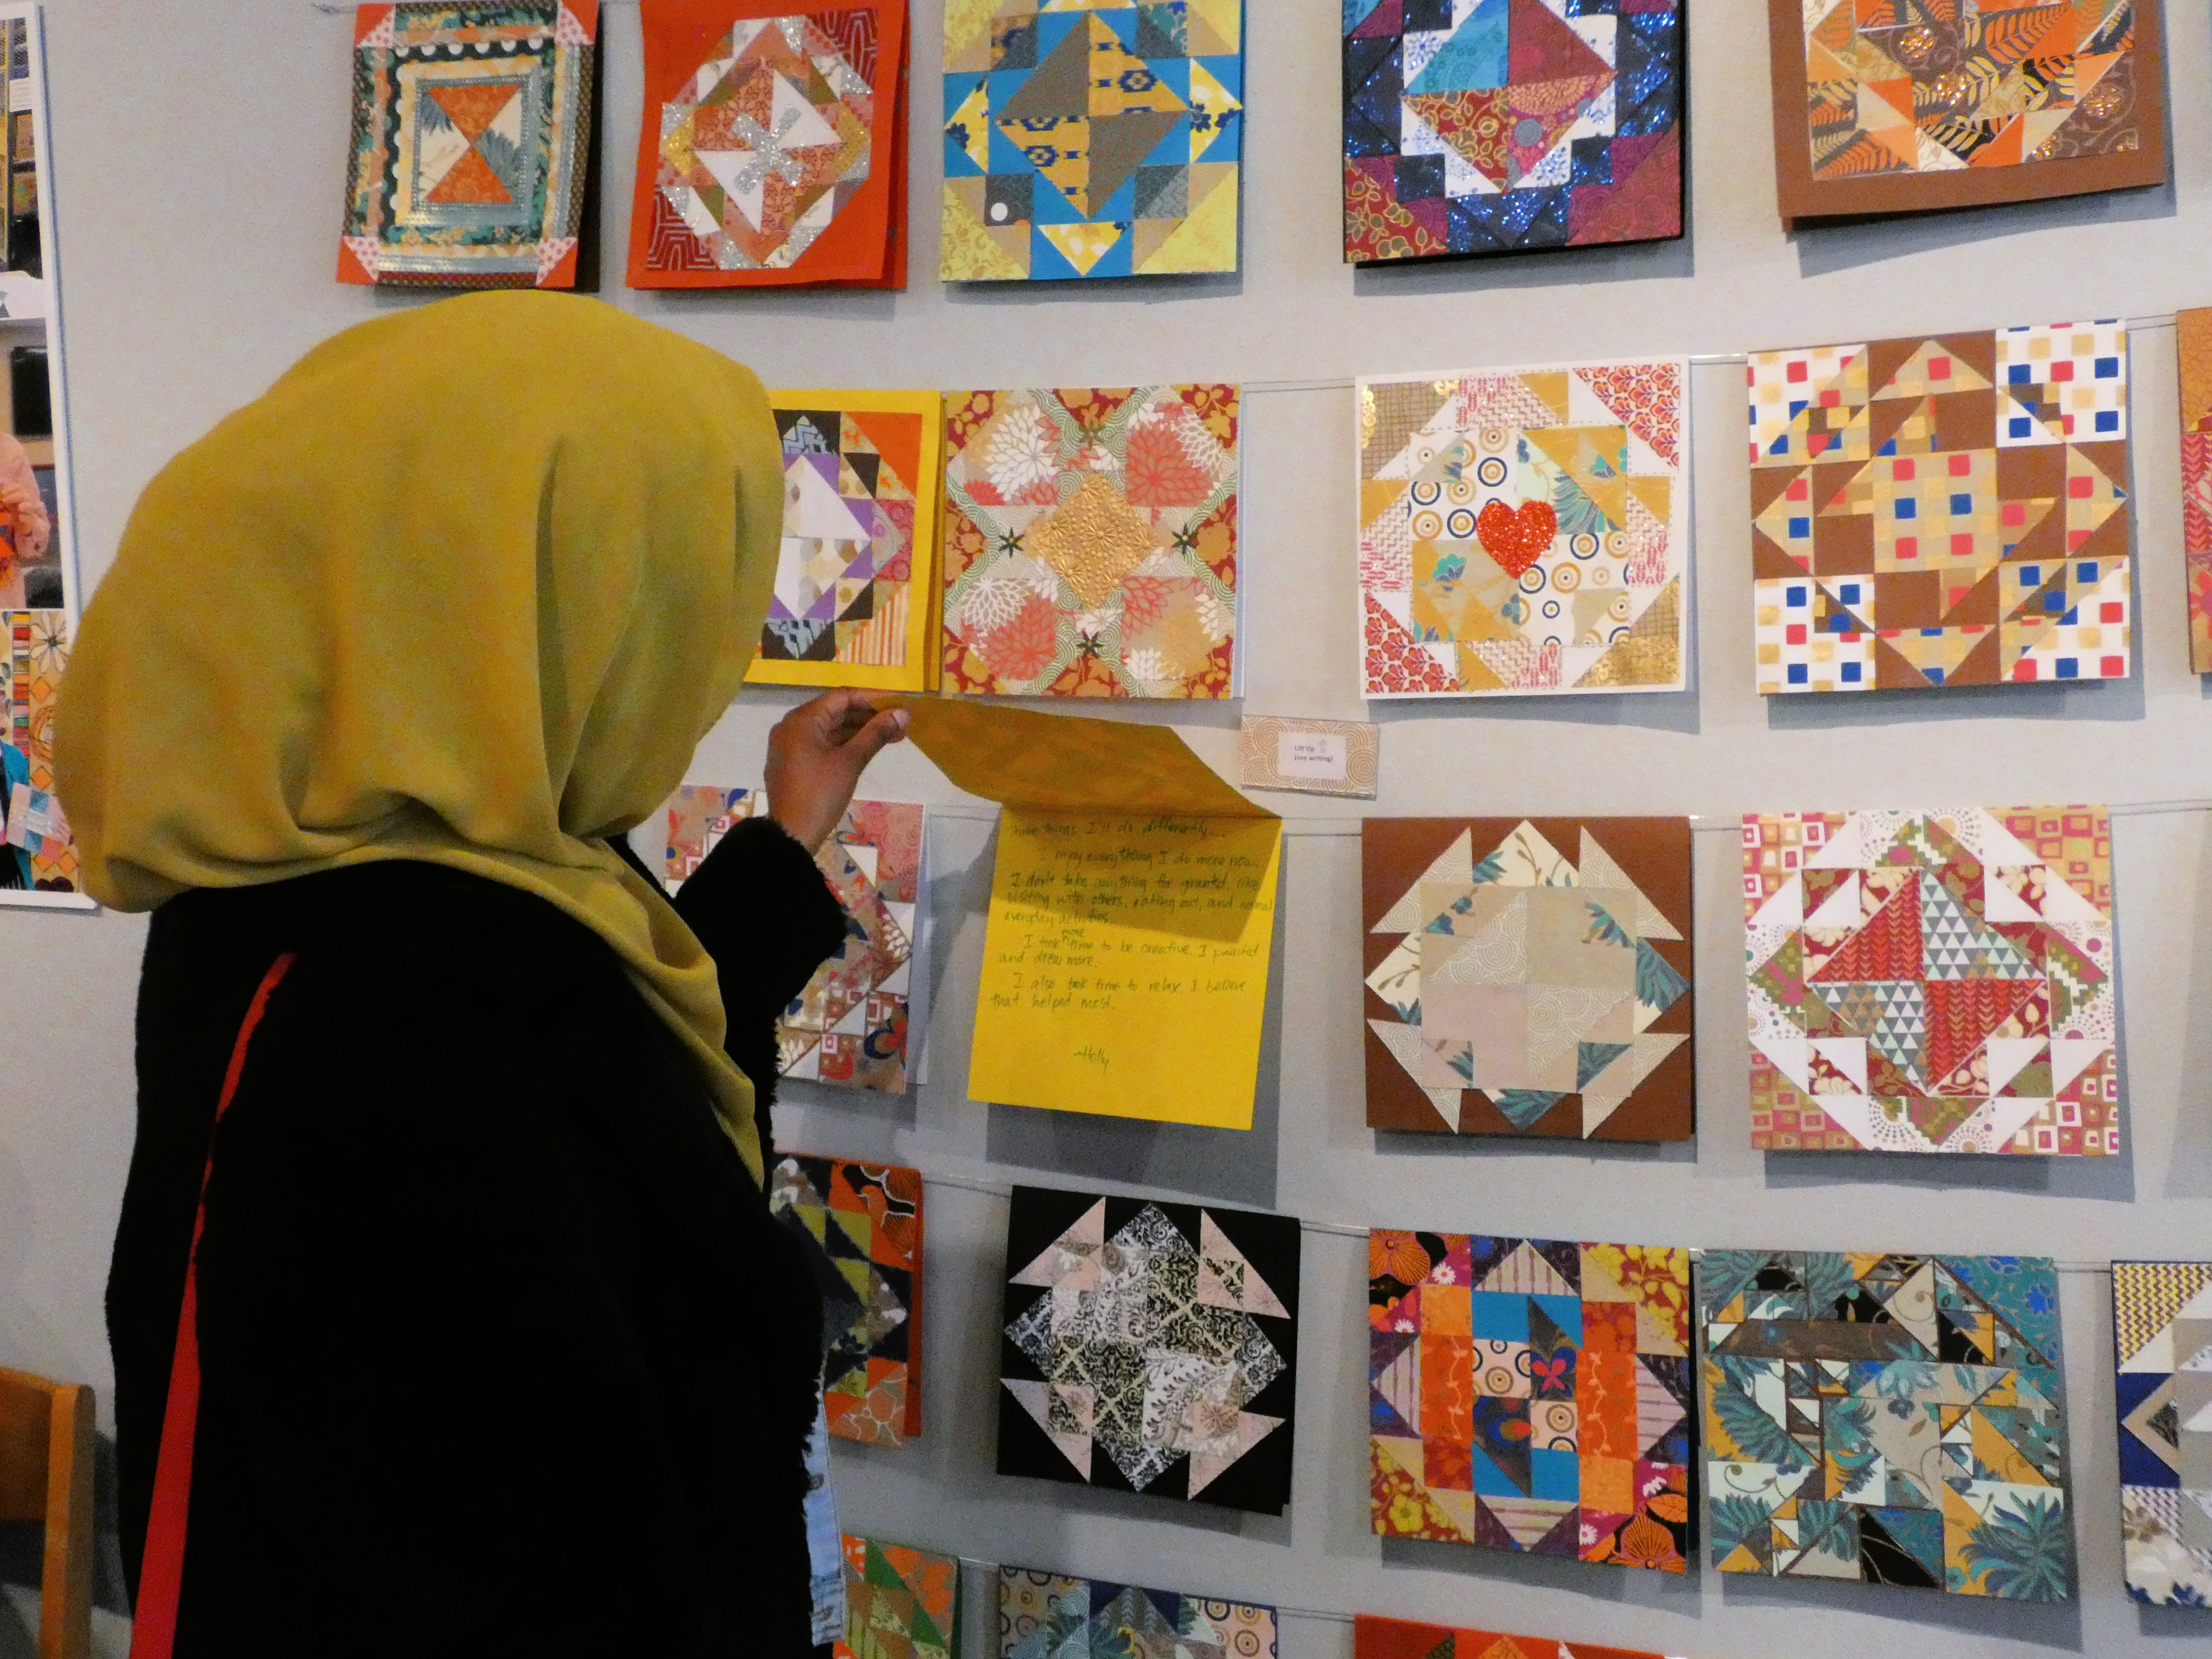 A person wearing a mustard-colored headscarf and black coat faces a wall and interacts with an artwork. The wall has a number of colorful, patterned works of paper, that look like cards, hung on rows of string.